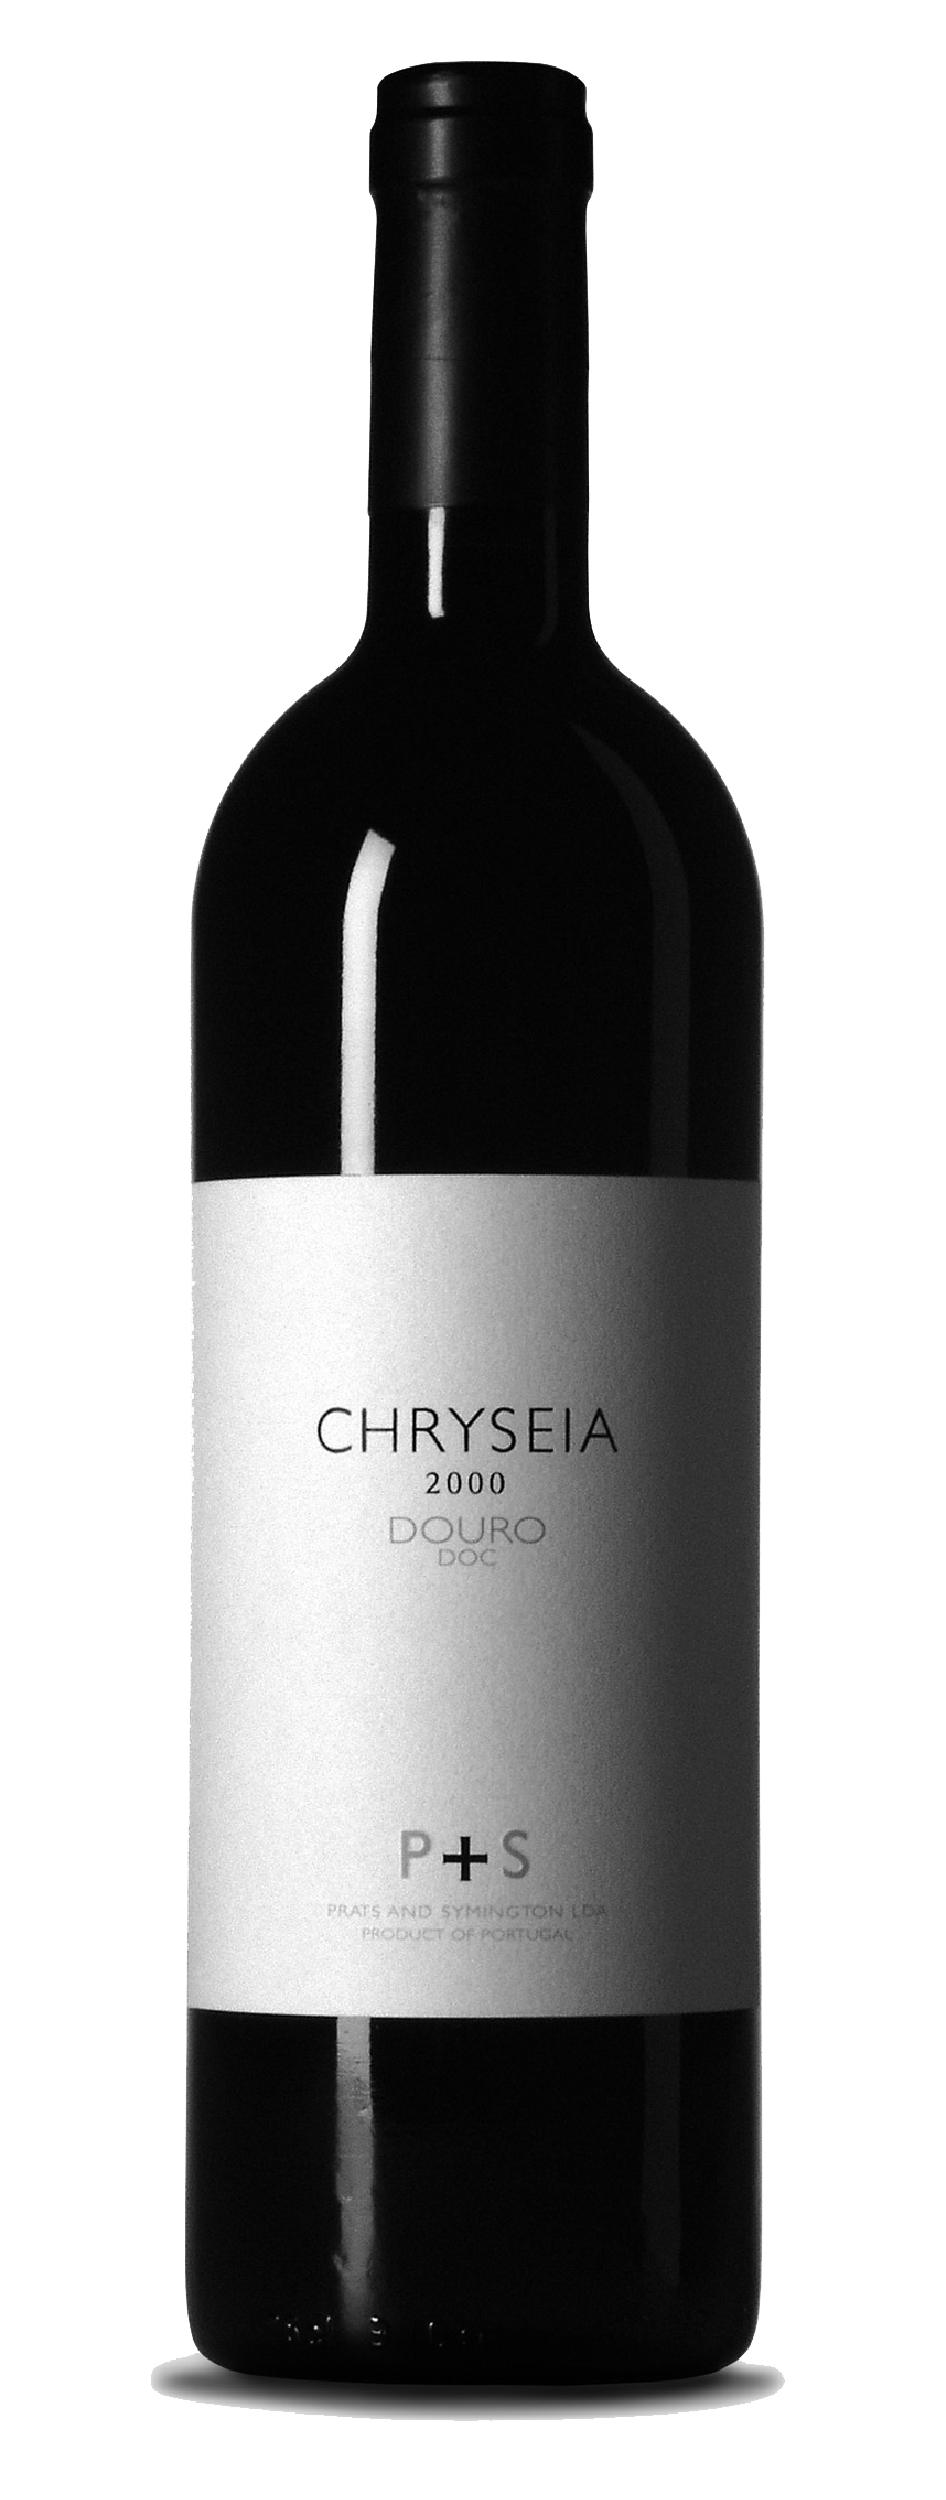 Product Image for P&S CHRYSEIA DOURO RED 2000